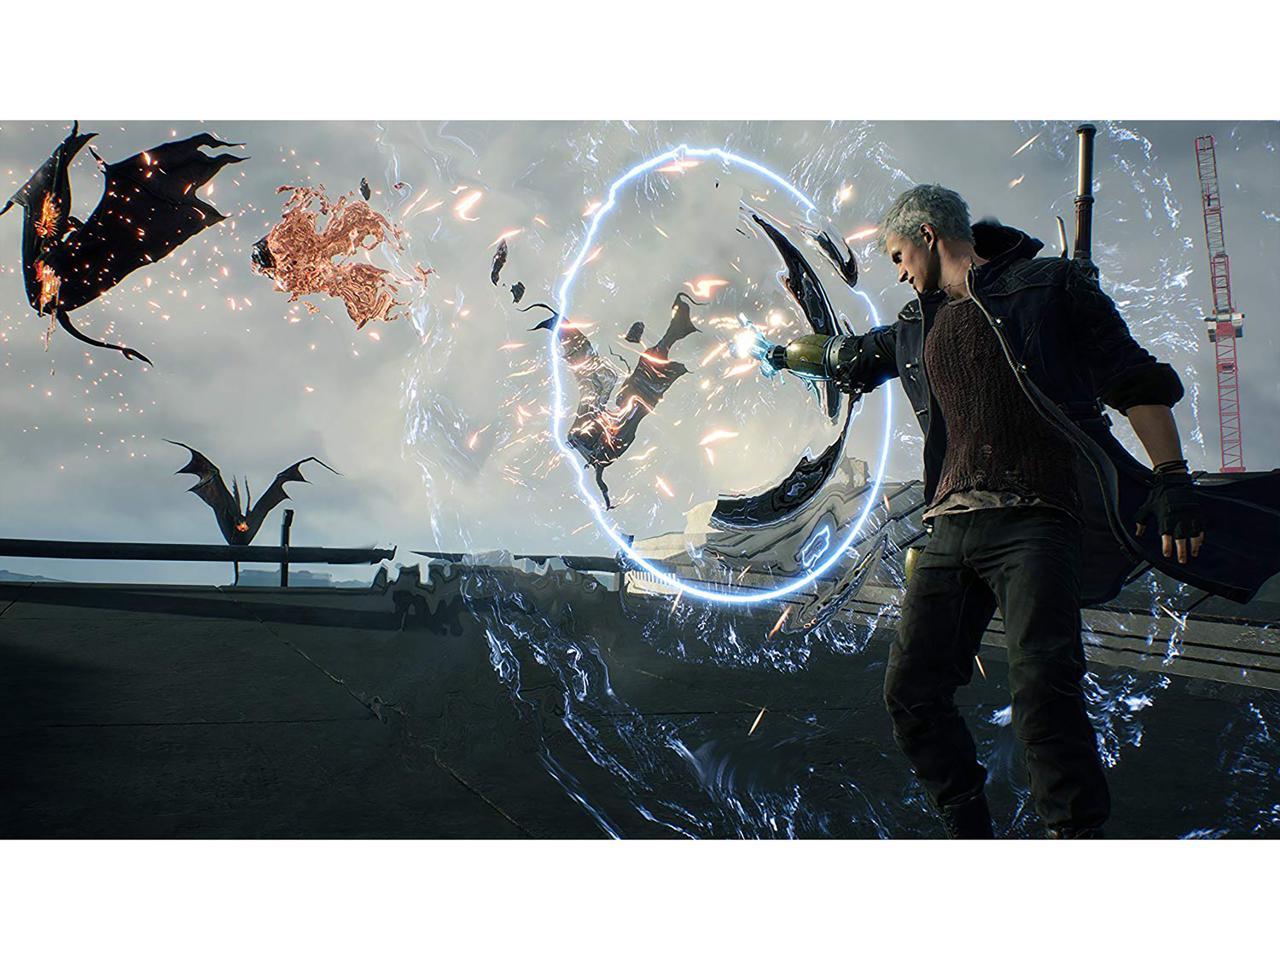 devil may cry 5 xbox